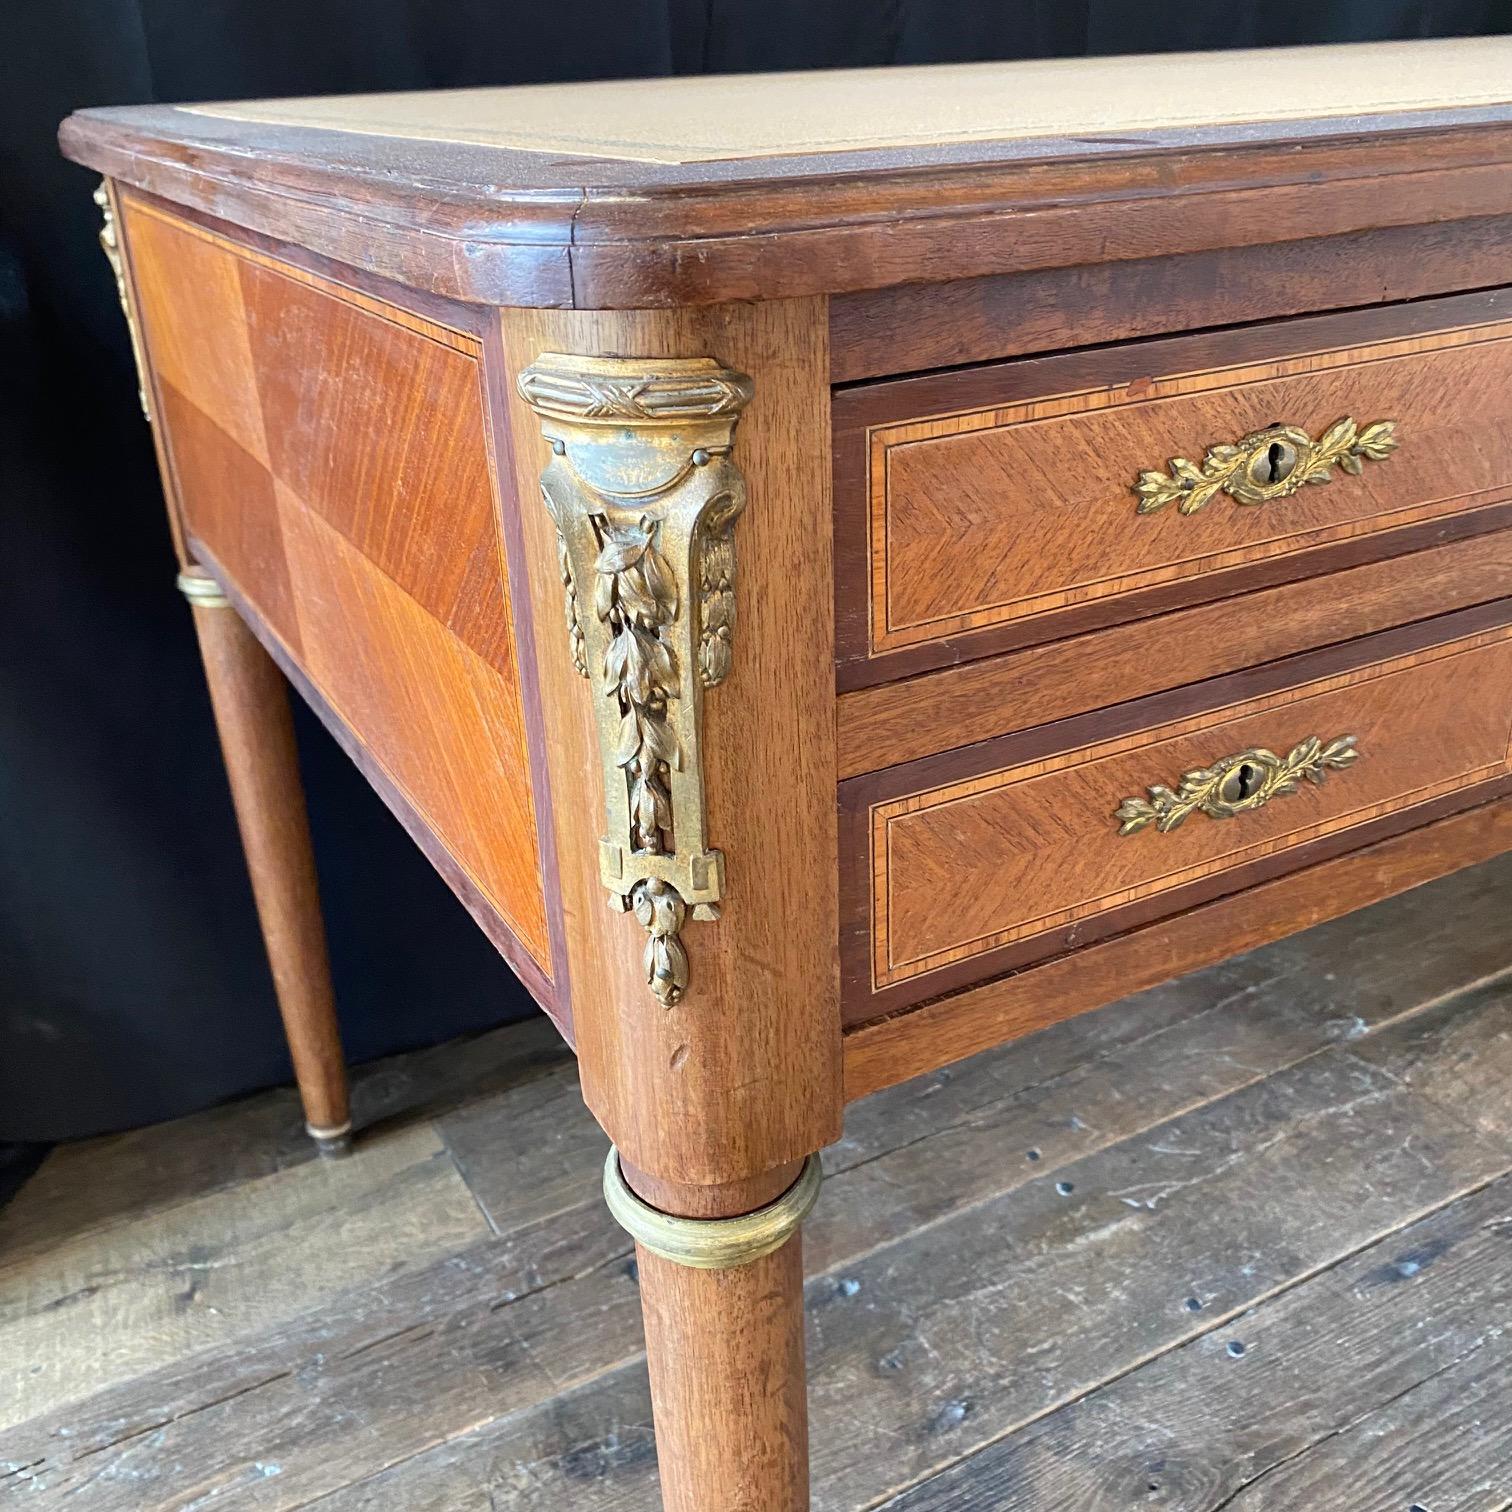 Beautiful 19th Century French Walnut Louis XVI Desk with immaculate new embossed leather writing surface. French Louis XVI bureau plat table desk with five spacious drawers and lovely classic inlaid woods with bronze trim and swags on the tops of